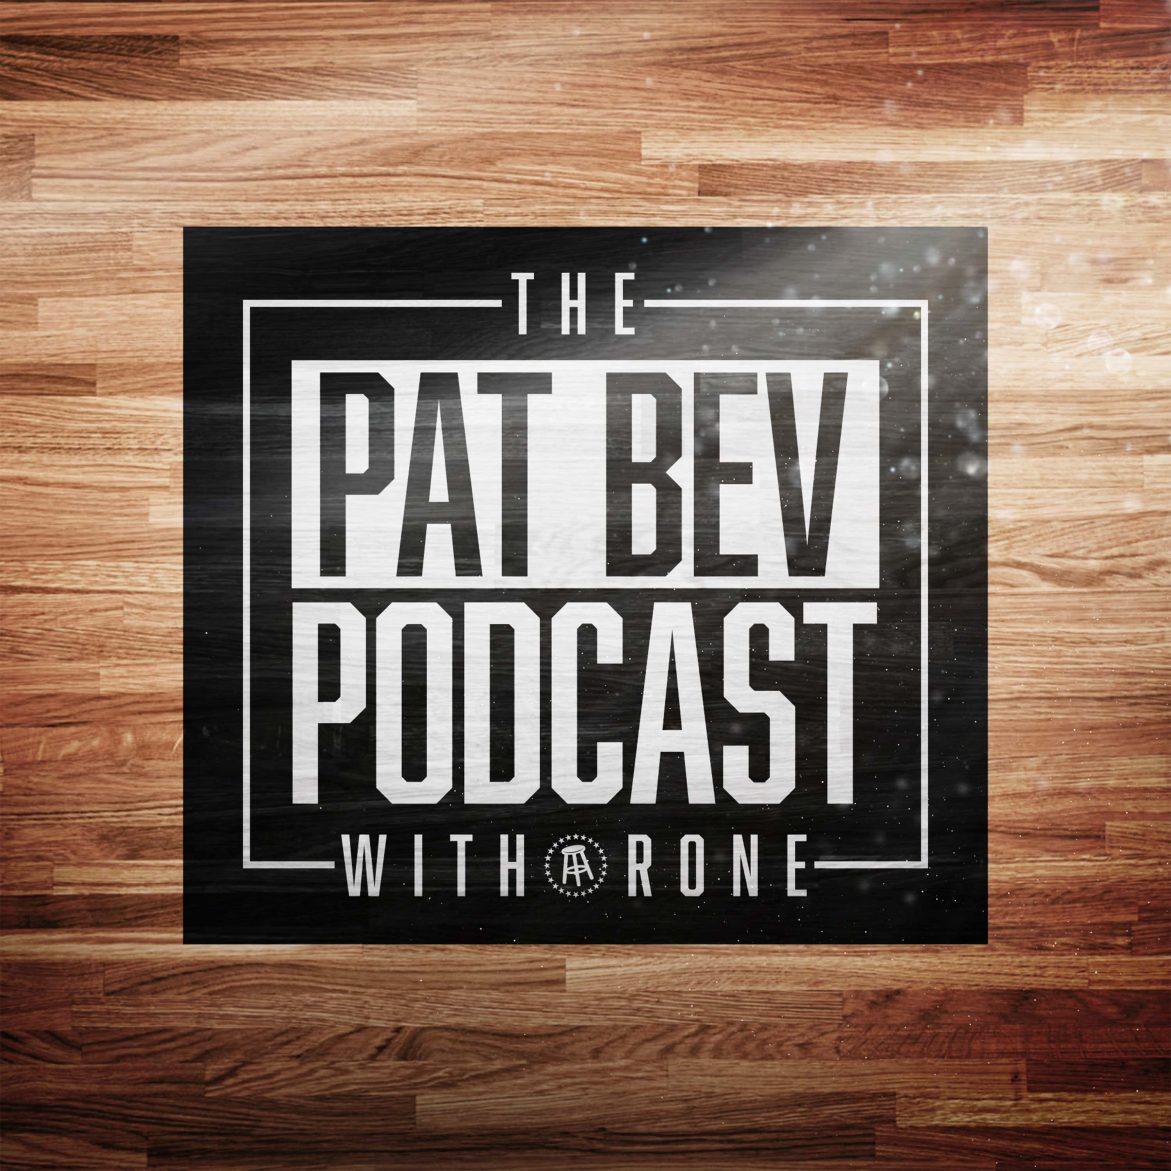 Black Podcasting - There's No Denying The Pat Bev Effect, Belt2A$$ Tour Exposes Clippers - Pat Bev Podcast w Rone Ep 74